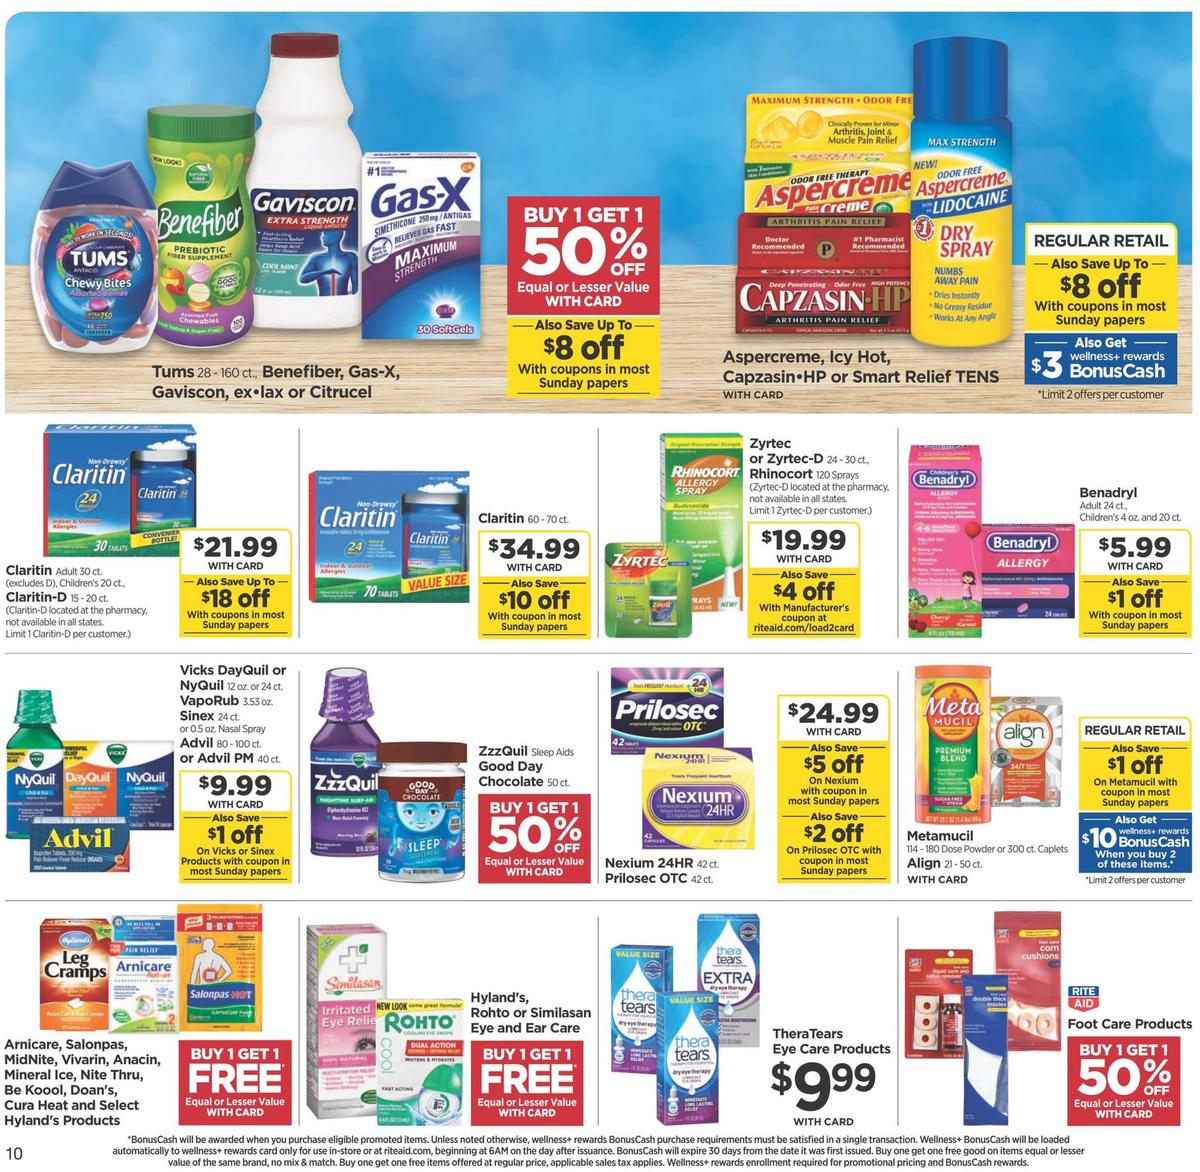 Rite Aid Weekly Ad from August 25